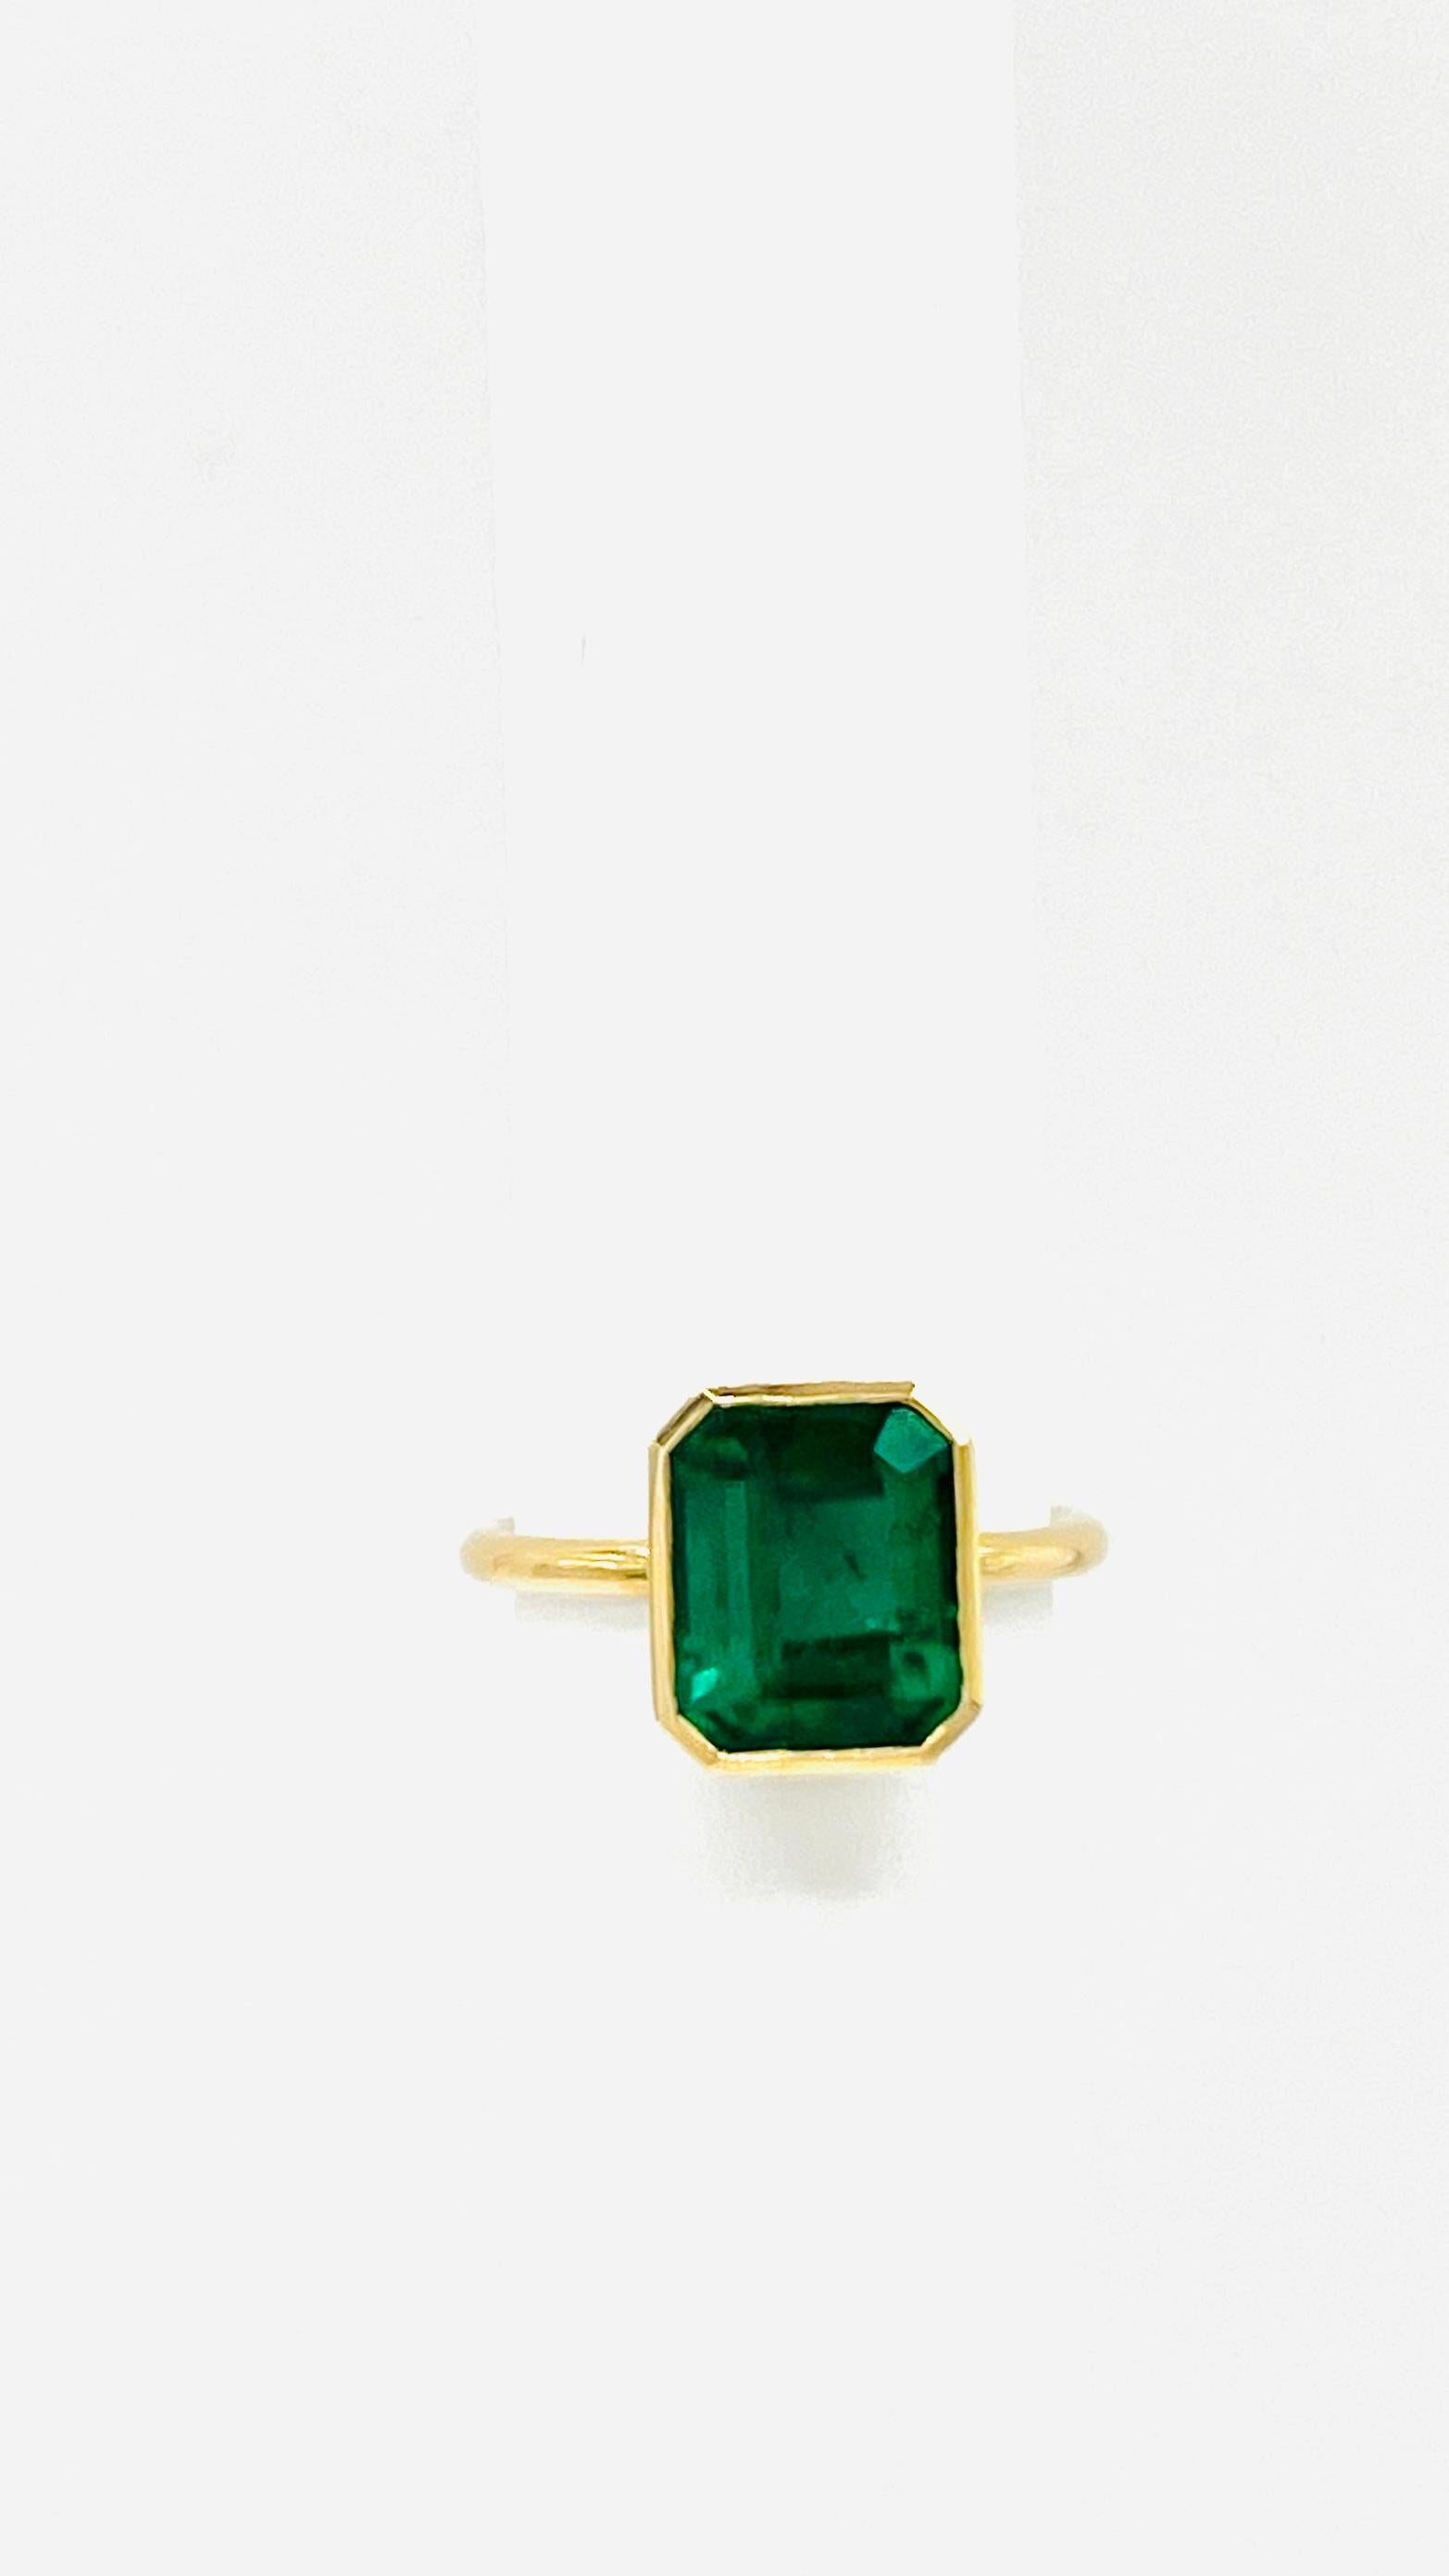 Emerald in Emerald Cut Bezel Solitaire Ring in 18K Yellow Gold 2